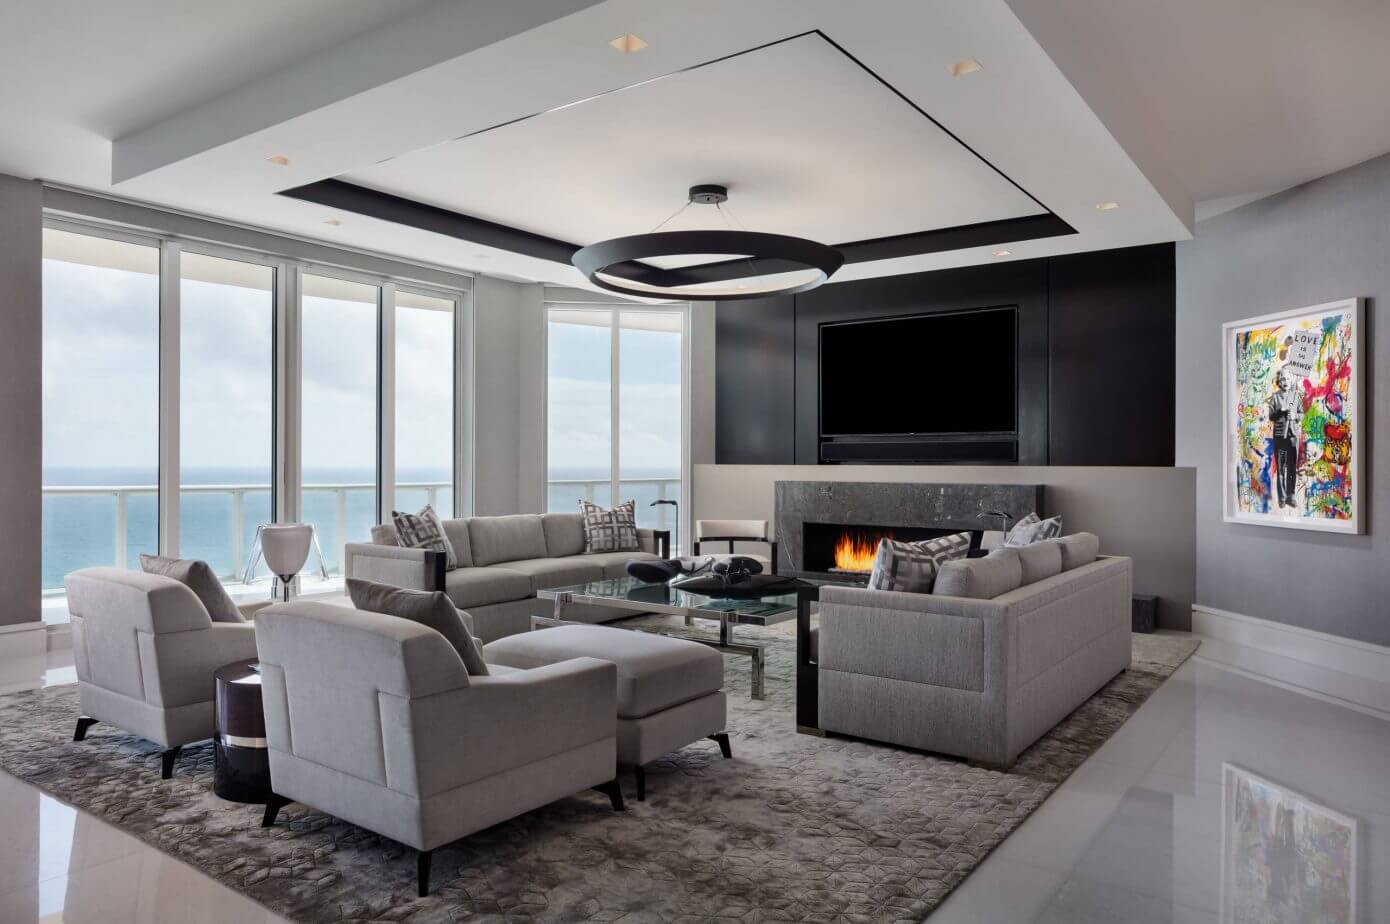 Luxury Penthouse by Willoughby Construction | HomeAdore - 1390 x 924 jpeg 94kB